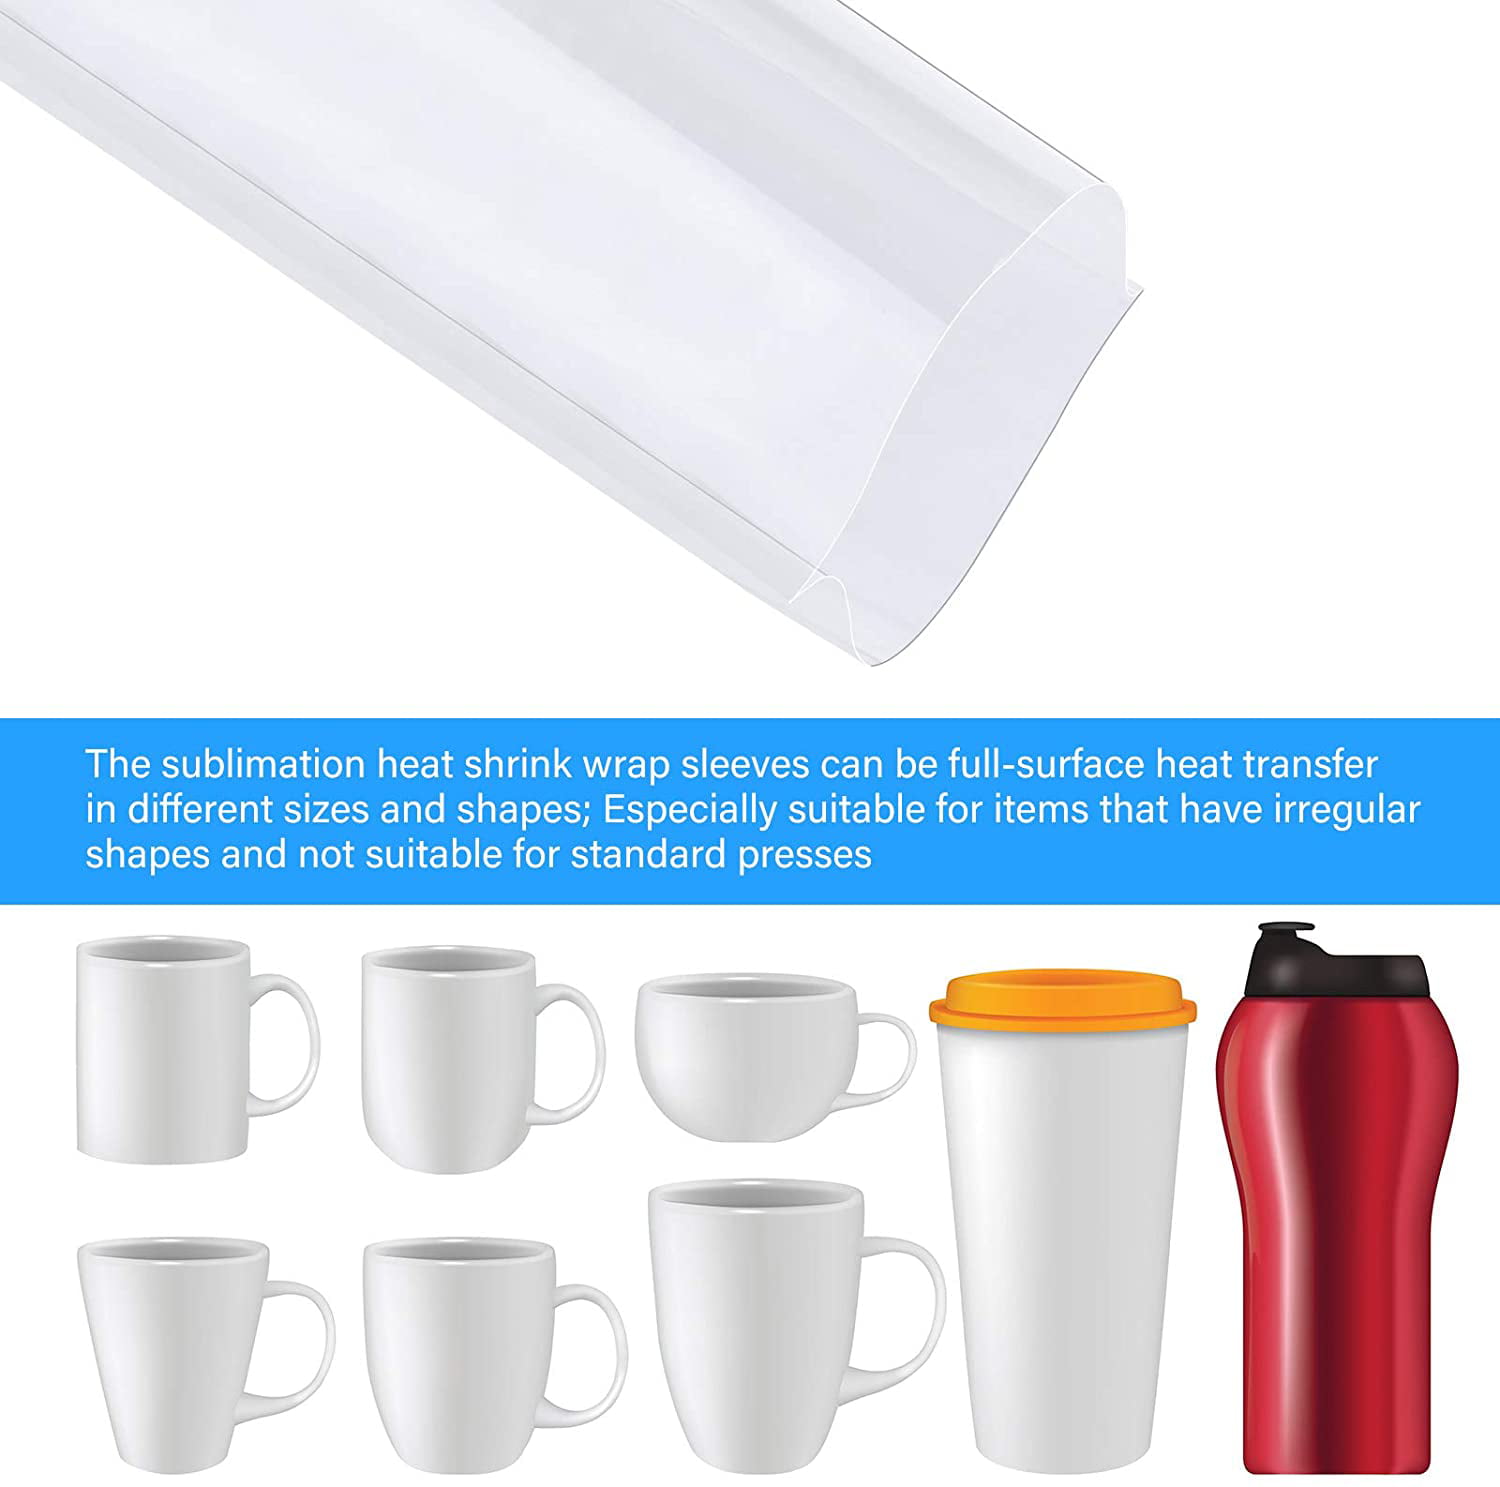 Mugs Bottles 100 Pieces,4.3 x 8 Inch Shrink Wrap Bags PVC Clear Sublimation Shrink Wrap Sleeves Double-Port Heat Shrink Bag for Phone Case Cups Candles Tumblers Jars Packaging Soap 